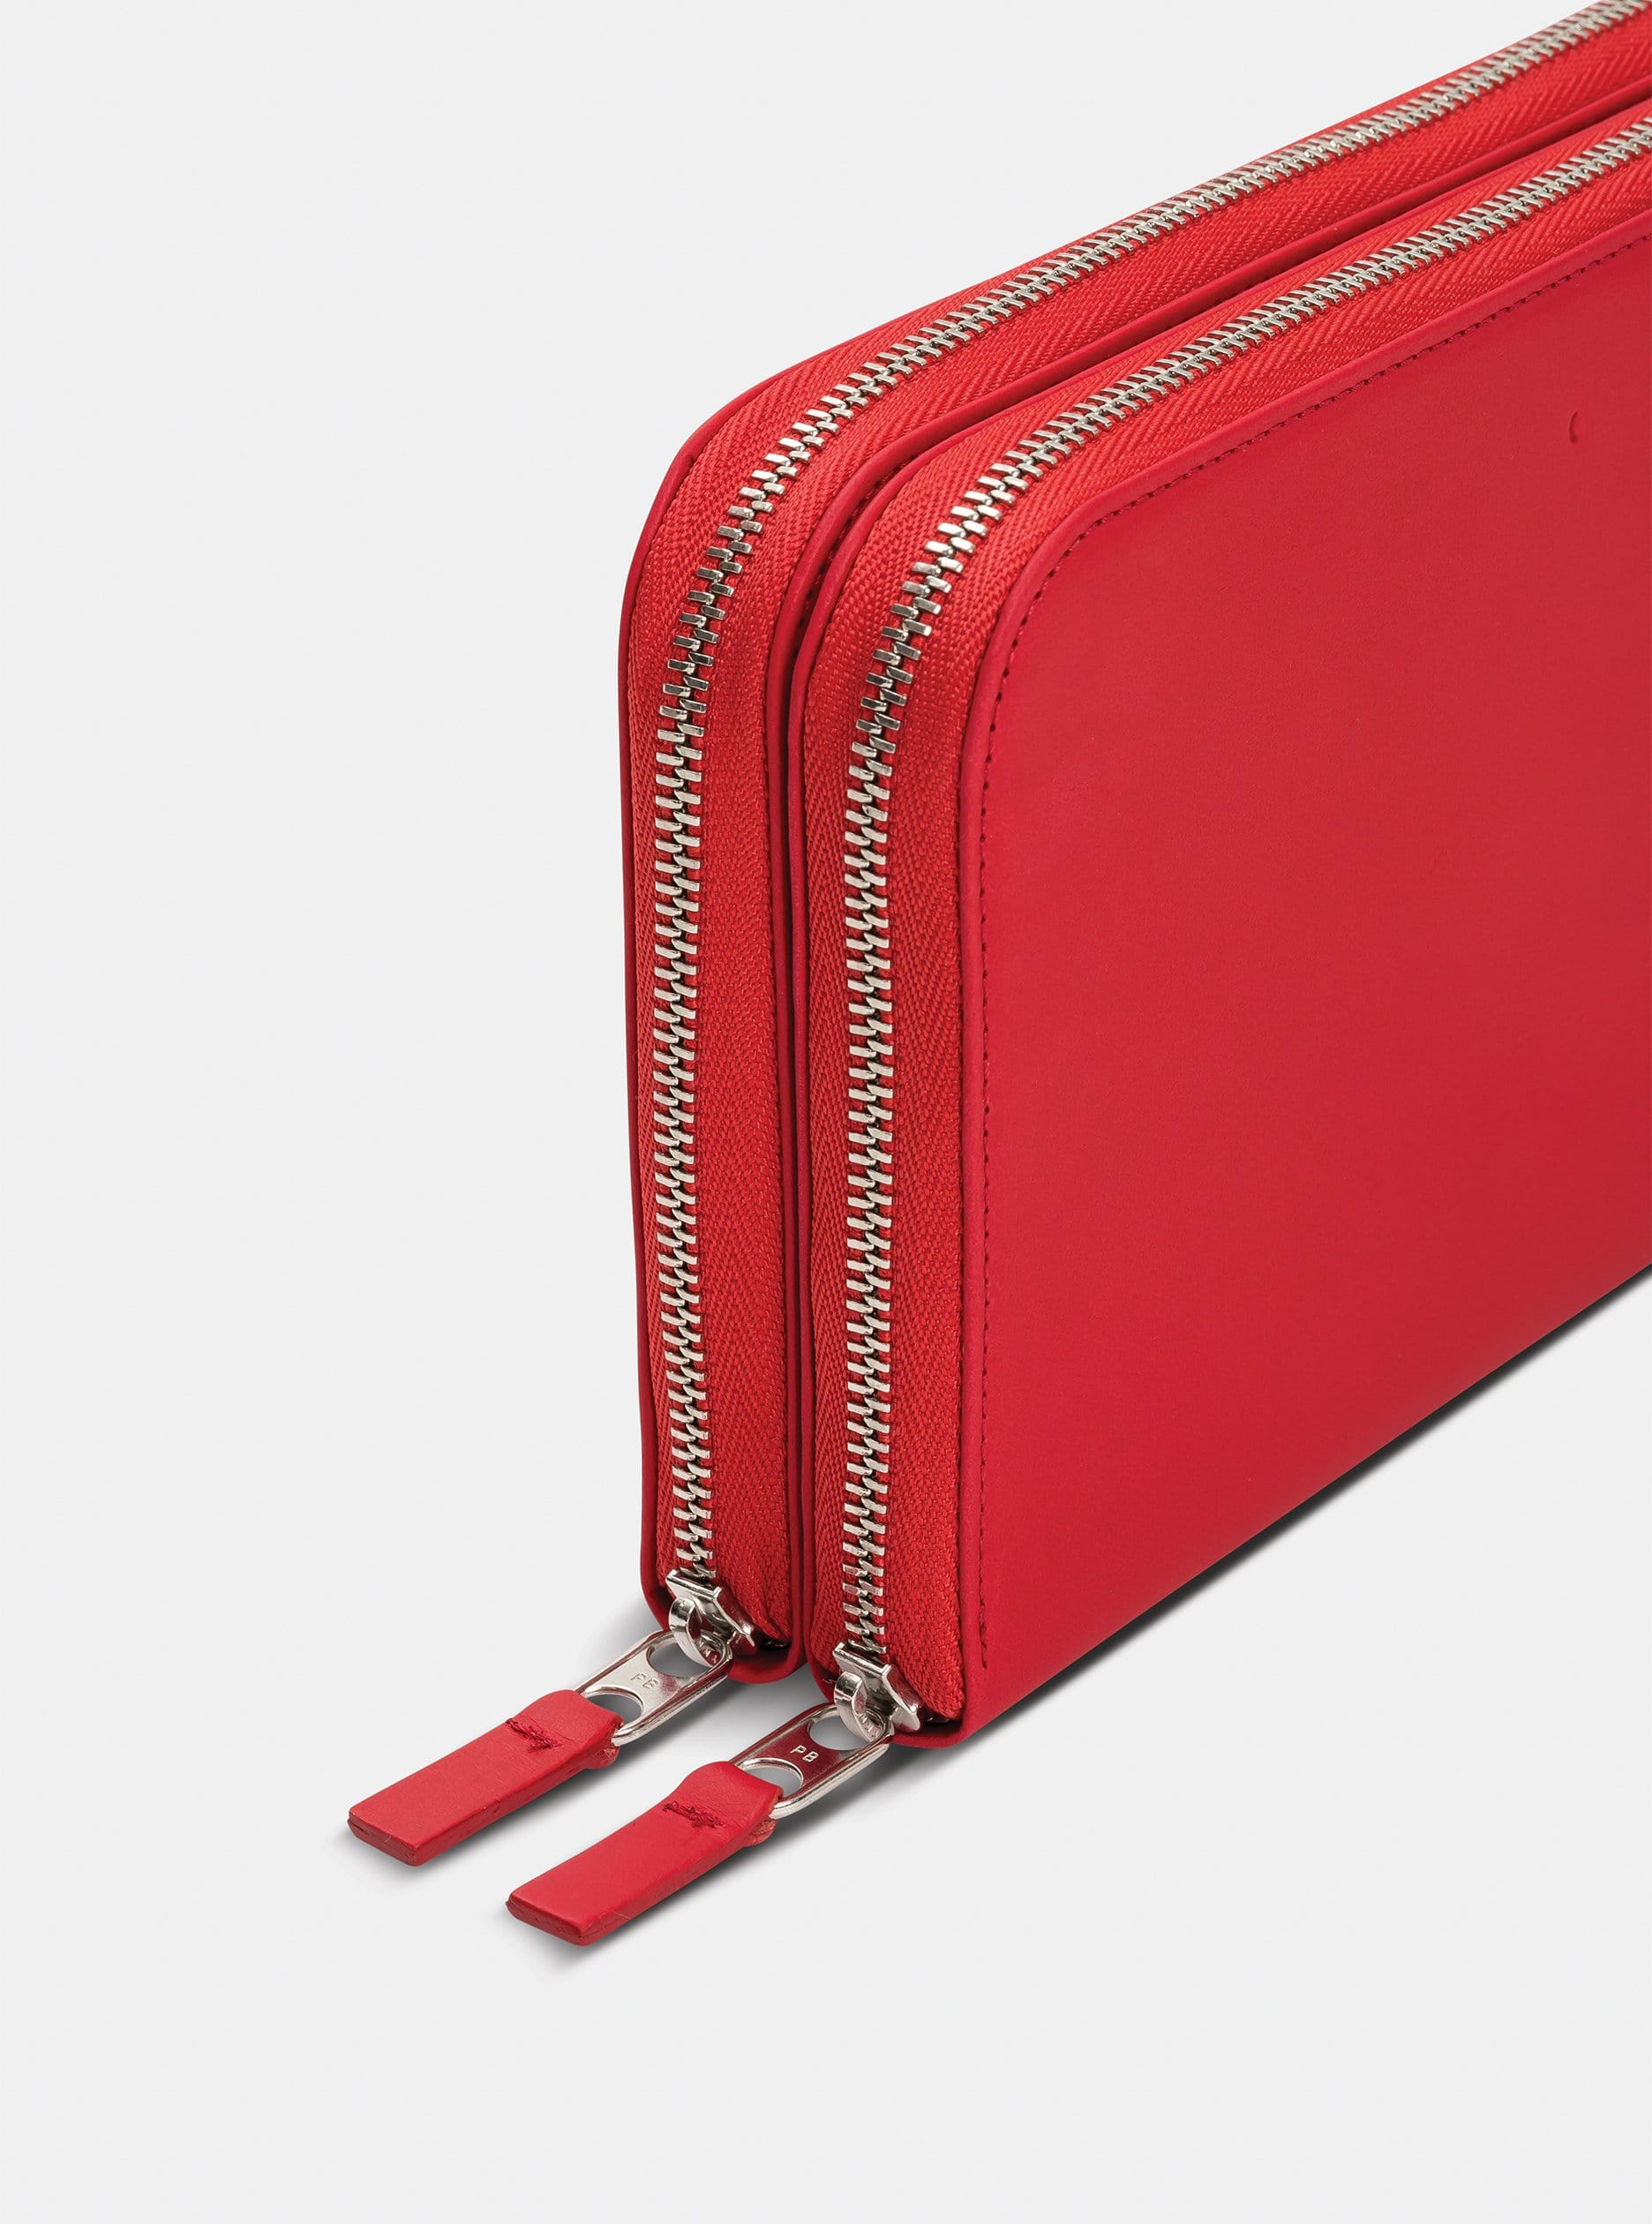 Red purse designed by Christian Metzner